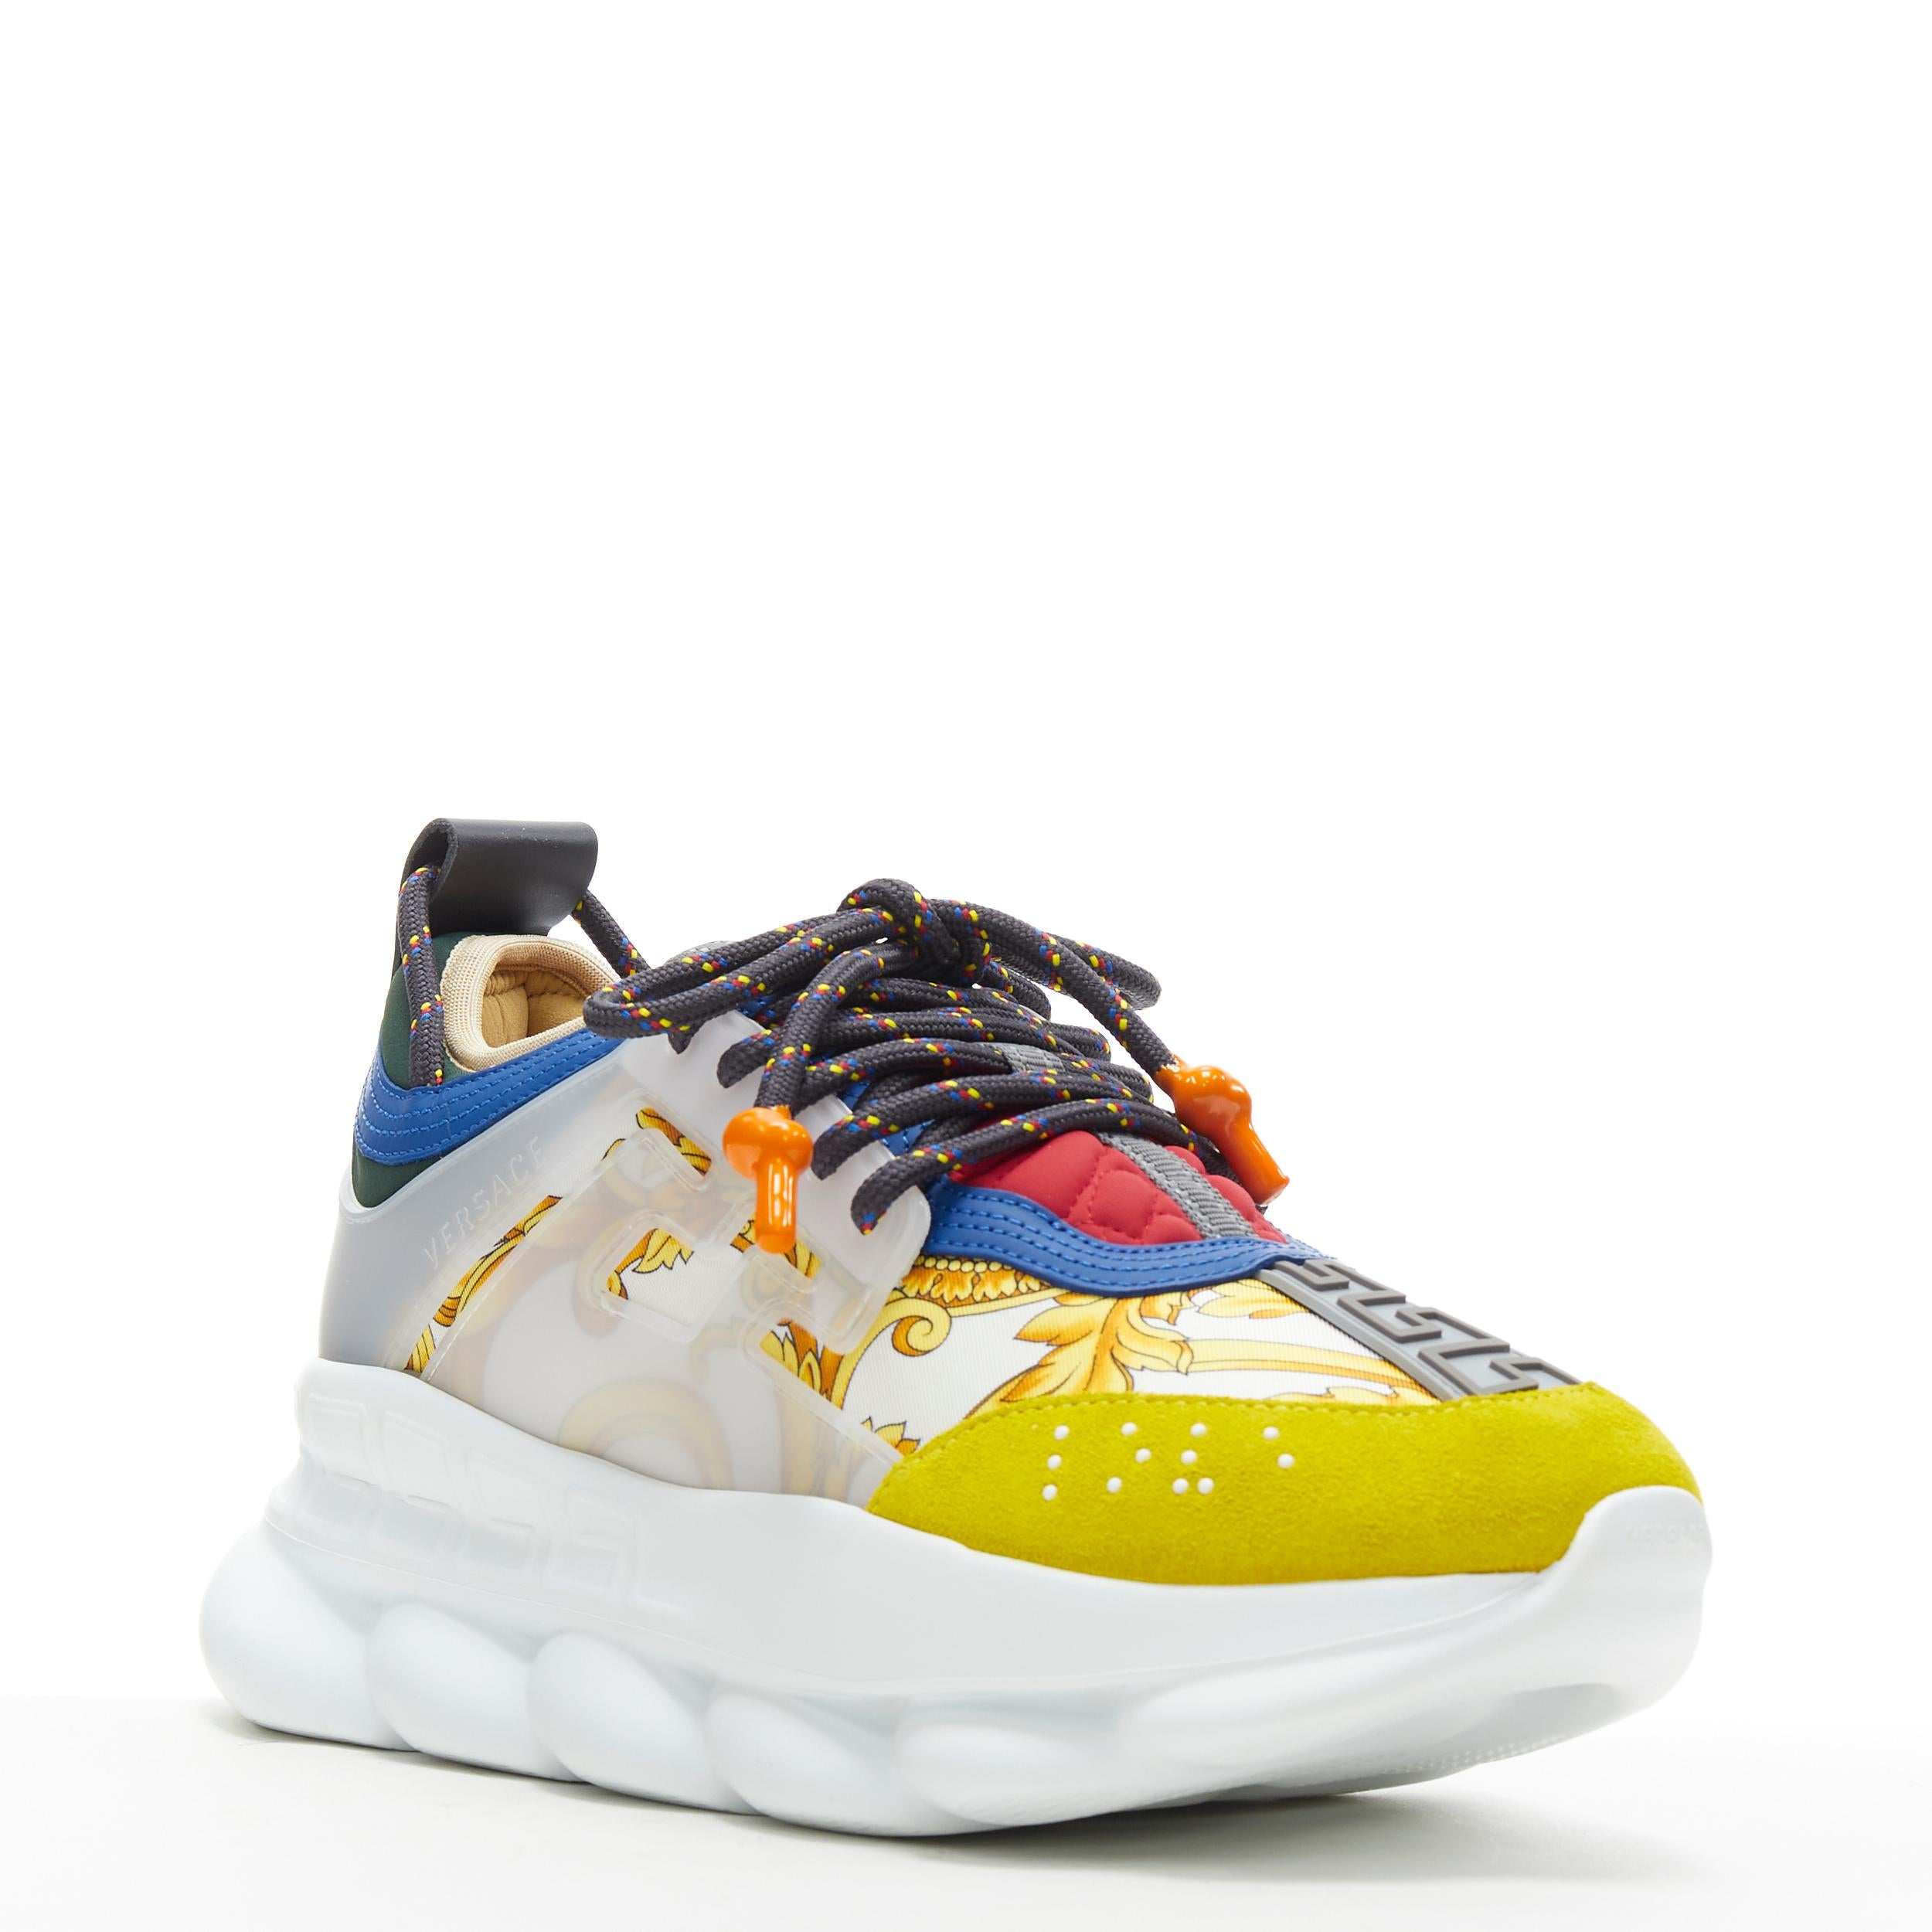 new VERSACE Chain Reaction gold barocco twill yellow blue suede sneaker EU40 US7 Reference: TGAS/B00877 
Brand: Versace 
Designer: Salehe Bembury 
Model: Chain Reaction White Barocco 
Material: Leather 
Color: Gold 
Pattern: Solid 
Closure: Lace up